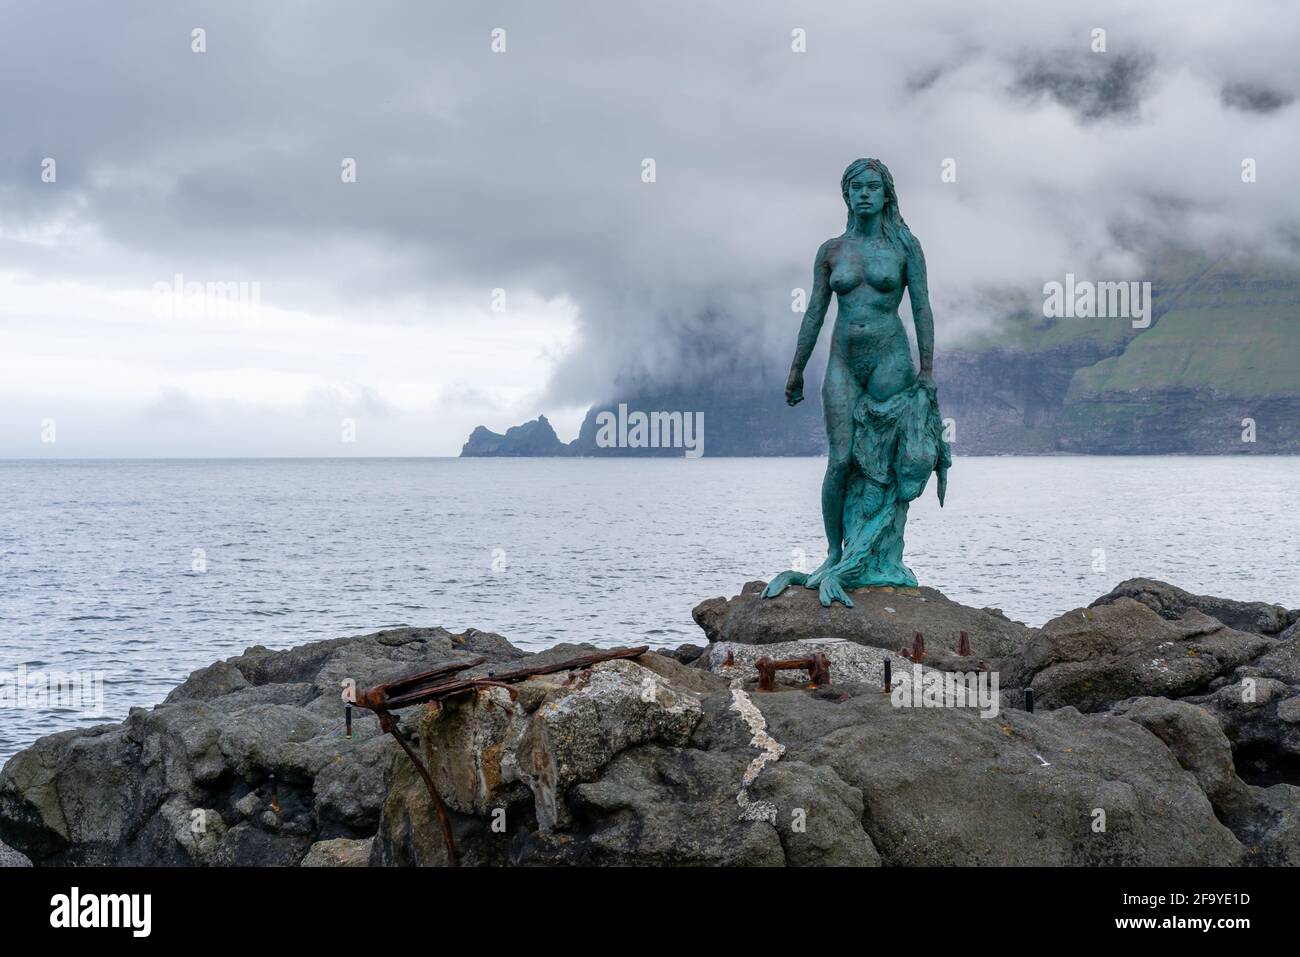 Mikladalur, Faroe Islands - 06.12.2017: Statue of Seal Woman on the rocky shore of Mikladalur, Kalsoy, with ocean anc dramatic clouds in the backgroun Stock Photo